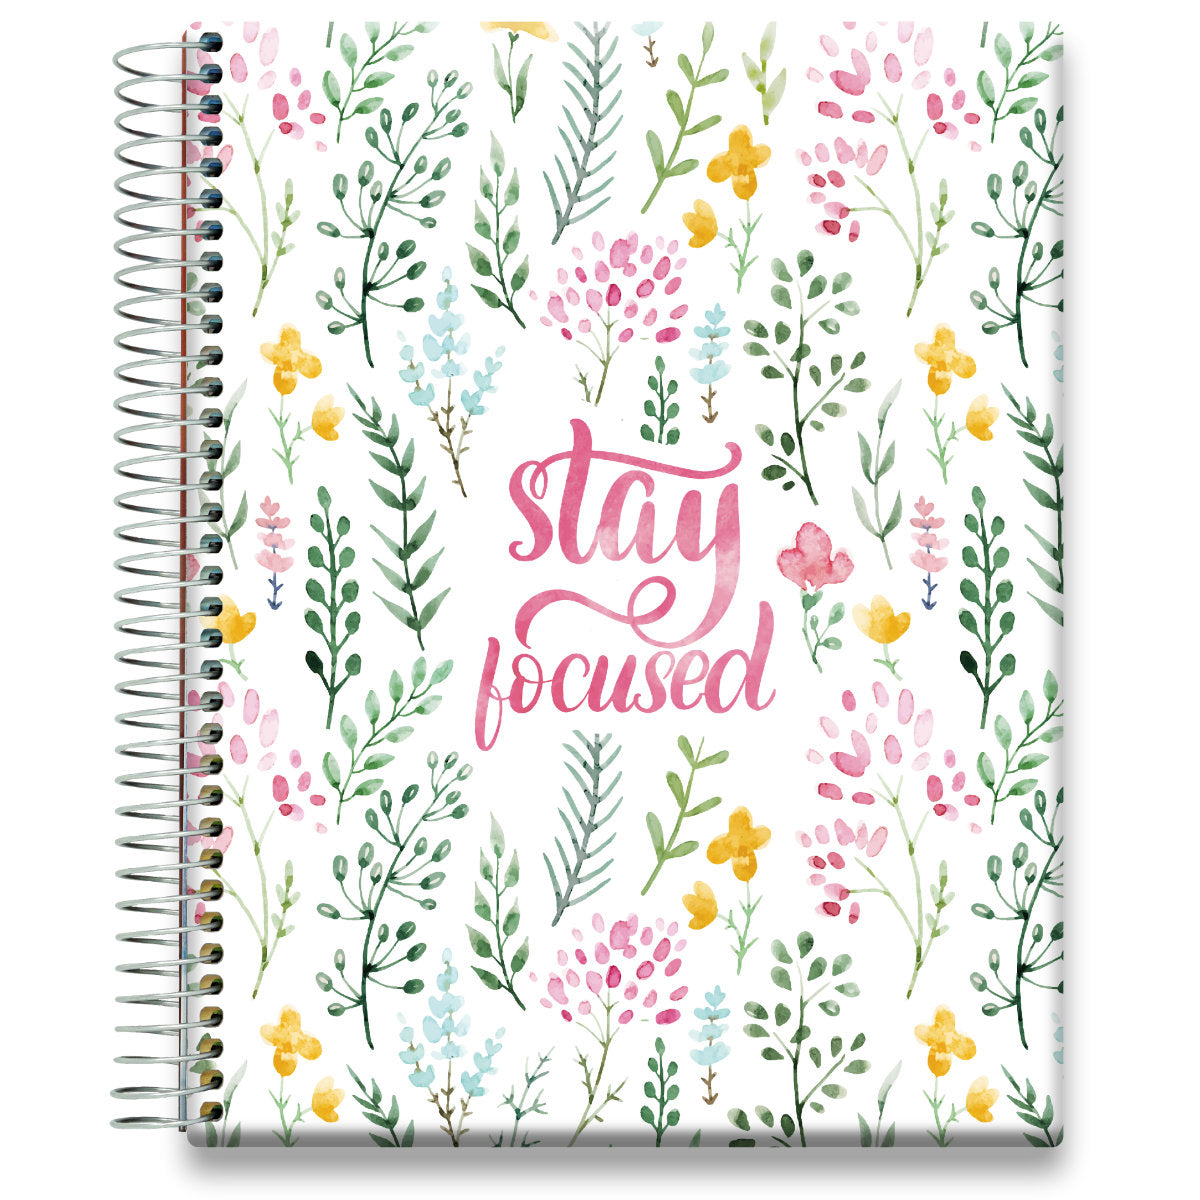 Oct 2024 to Dec 2025 Planner - Stay Focused Floral